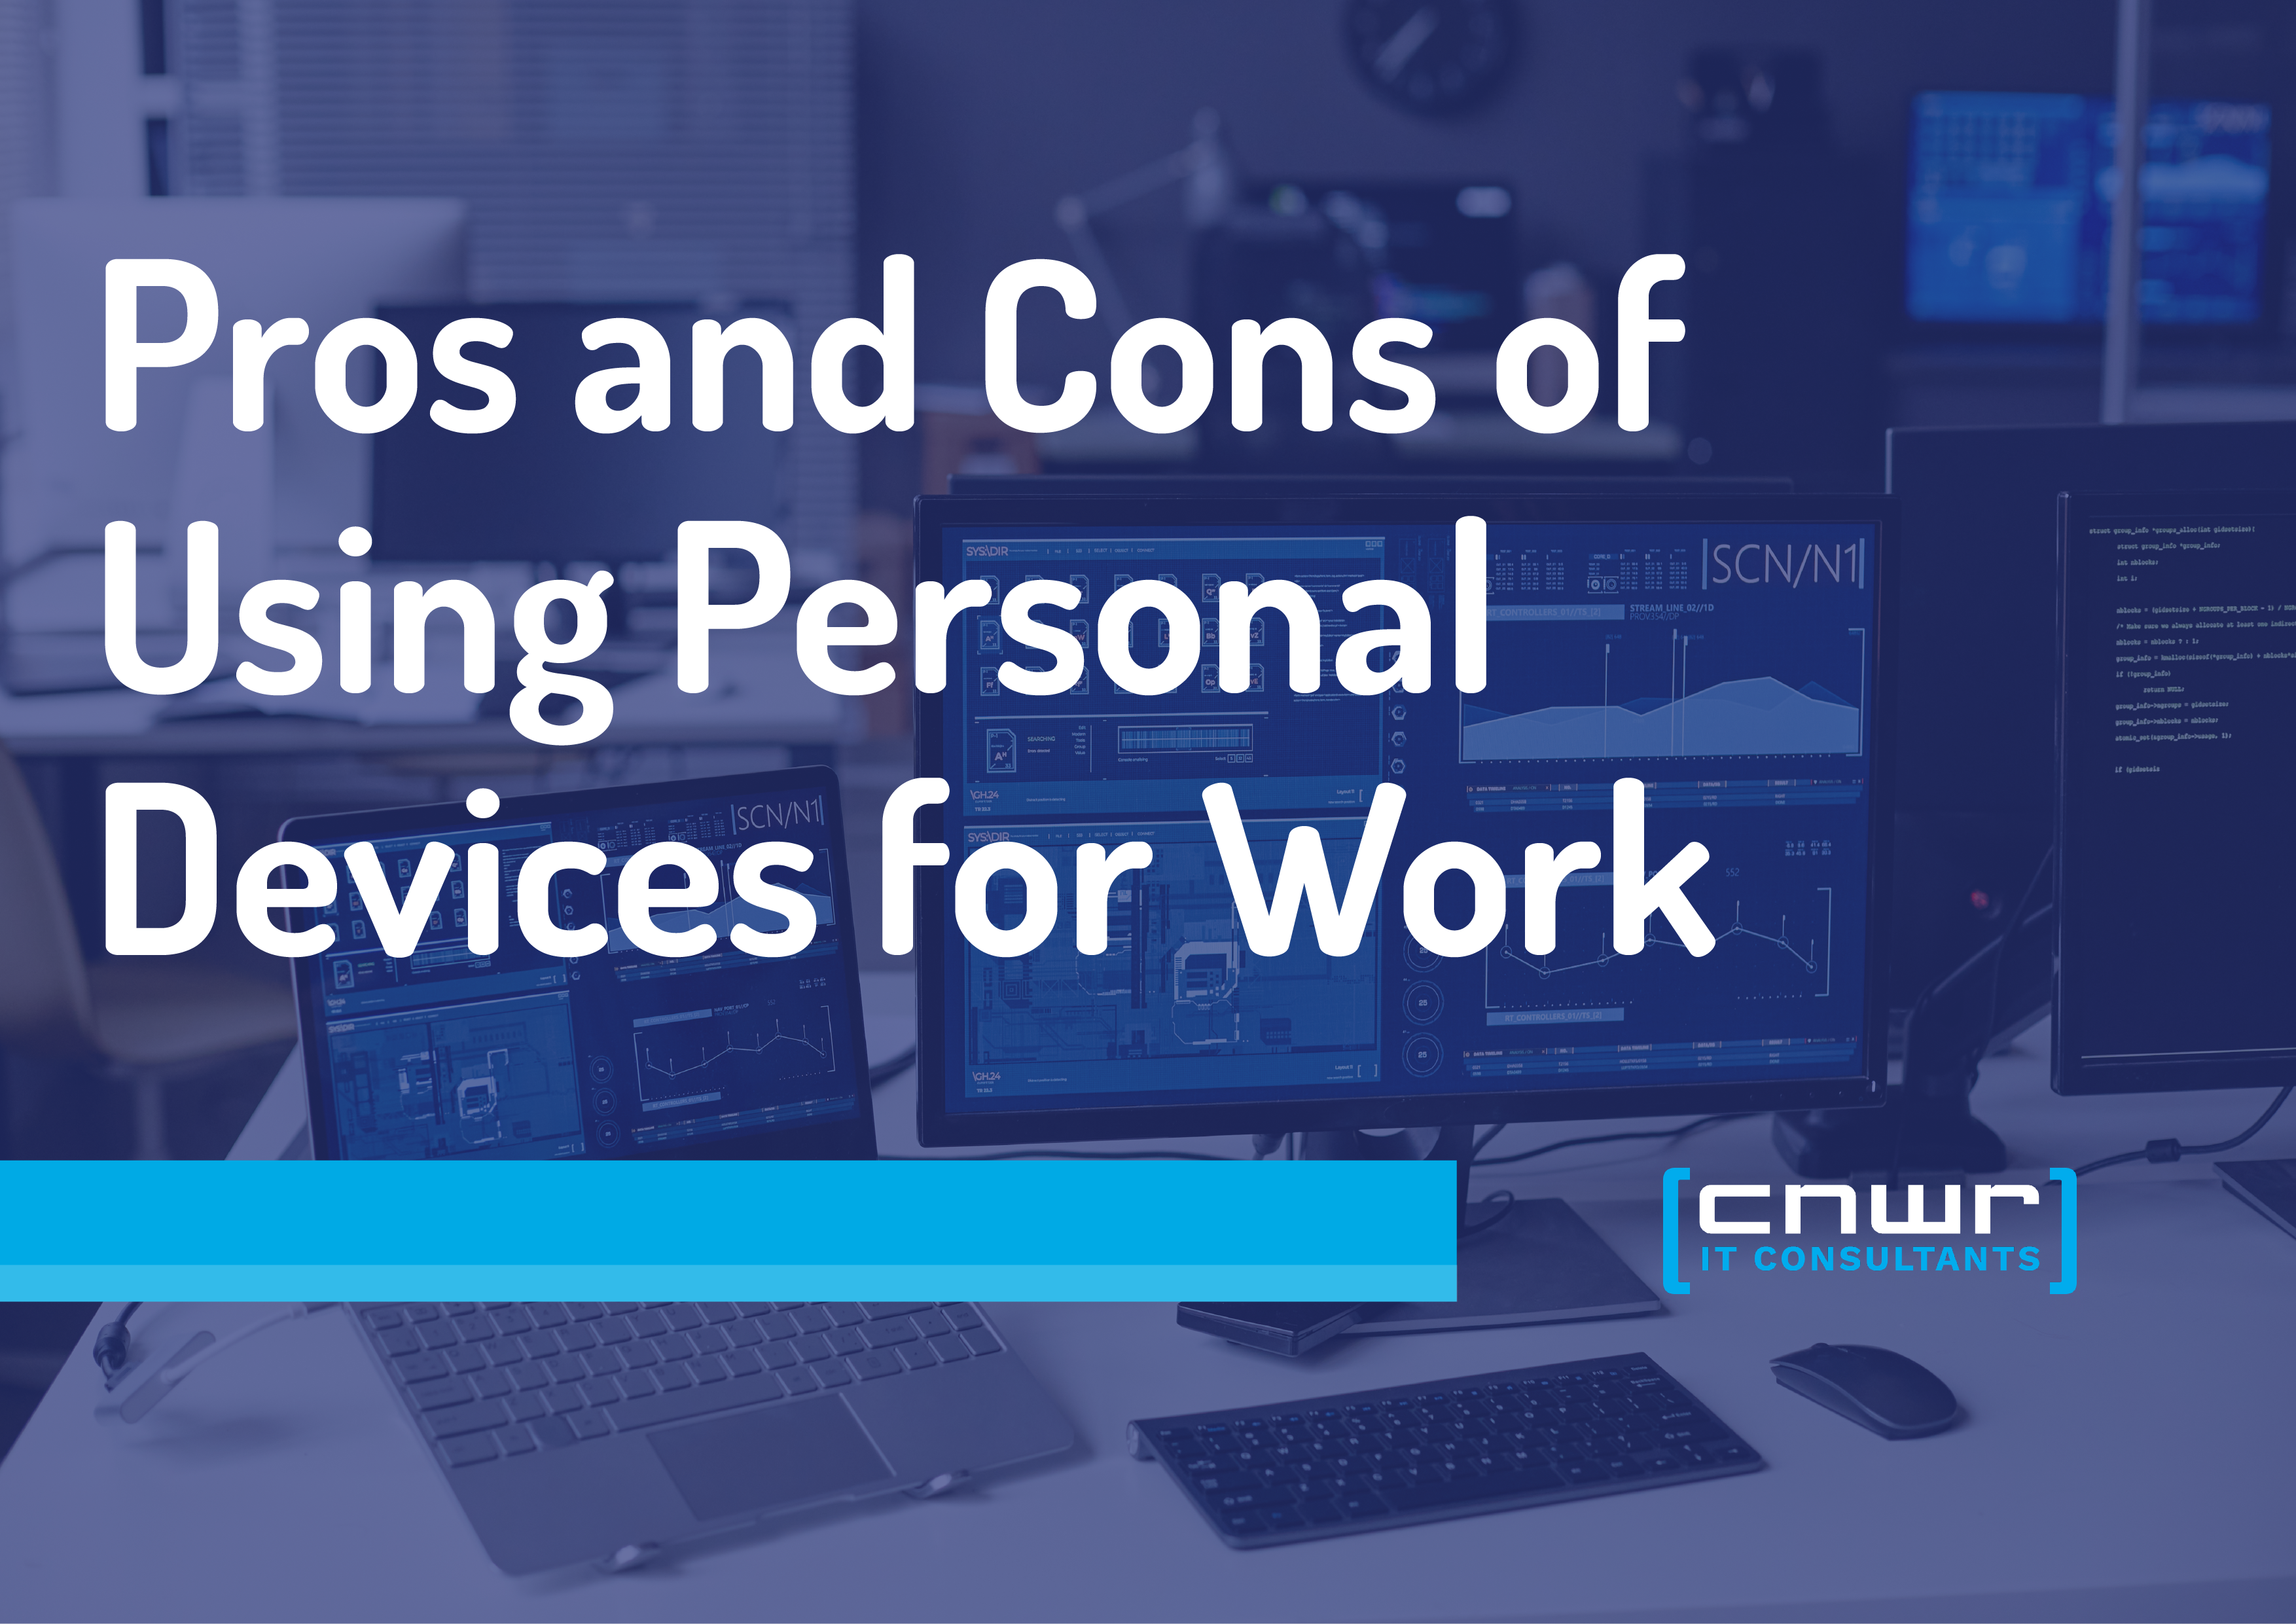 Your Phone, Your Rules? Pros and Cons of Using Personal Devices for Work